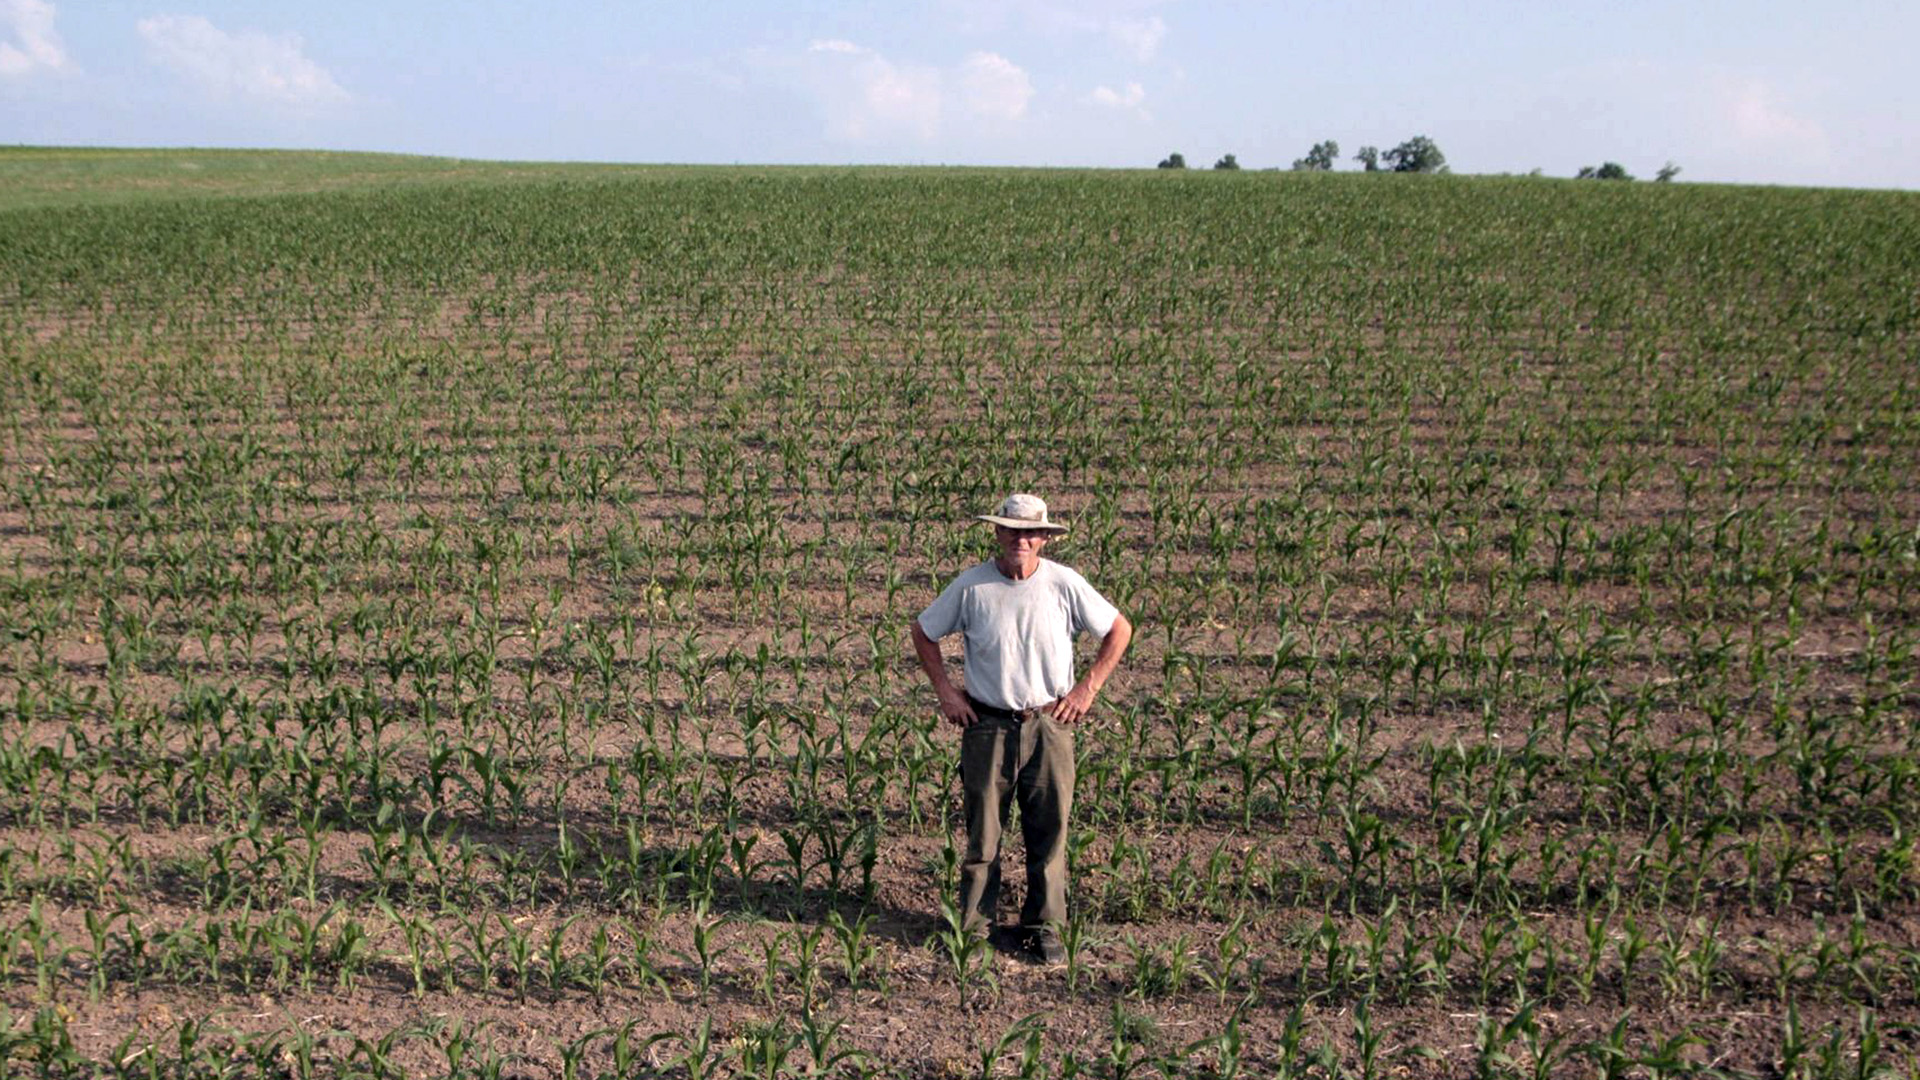 Nick Stanek stands among rows of low crops in a hillside field, with the tops of trees visible on the horizon.